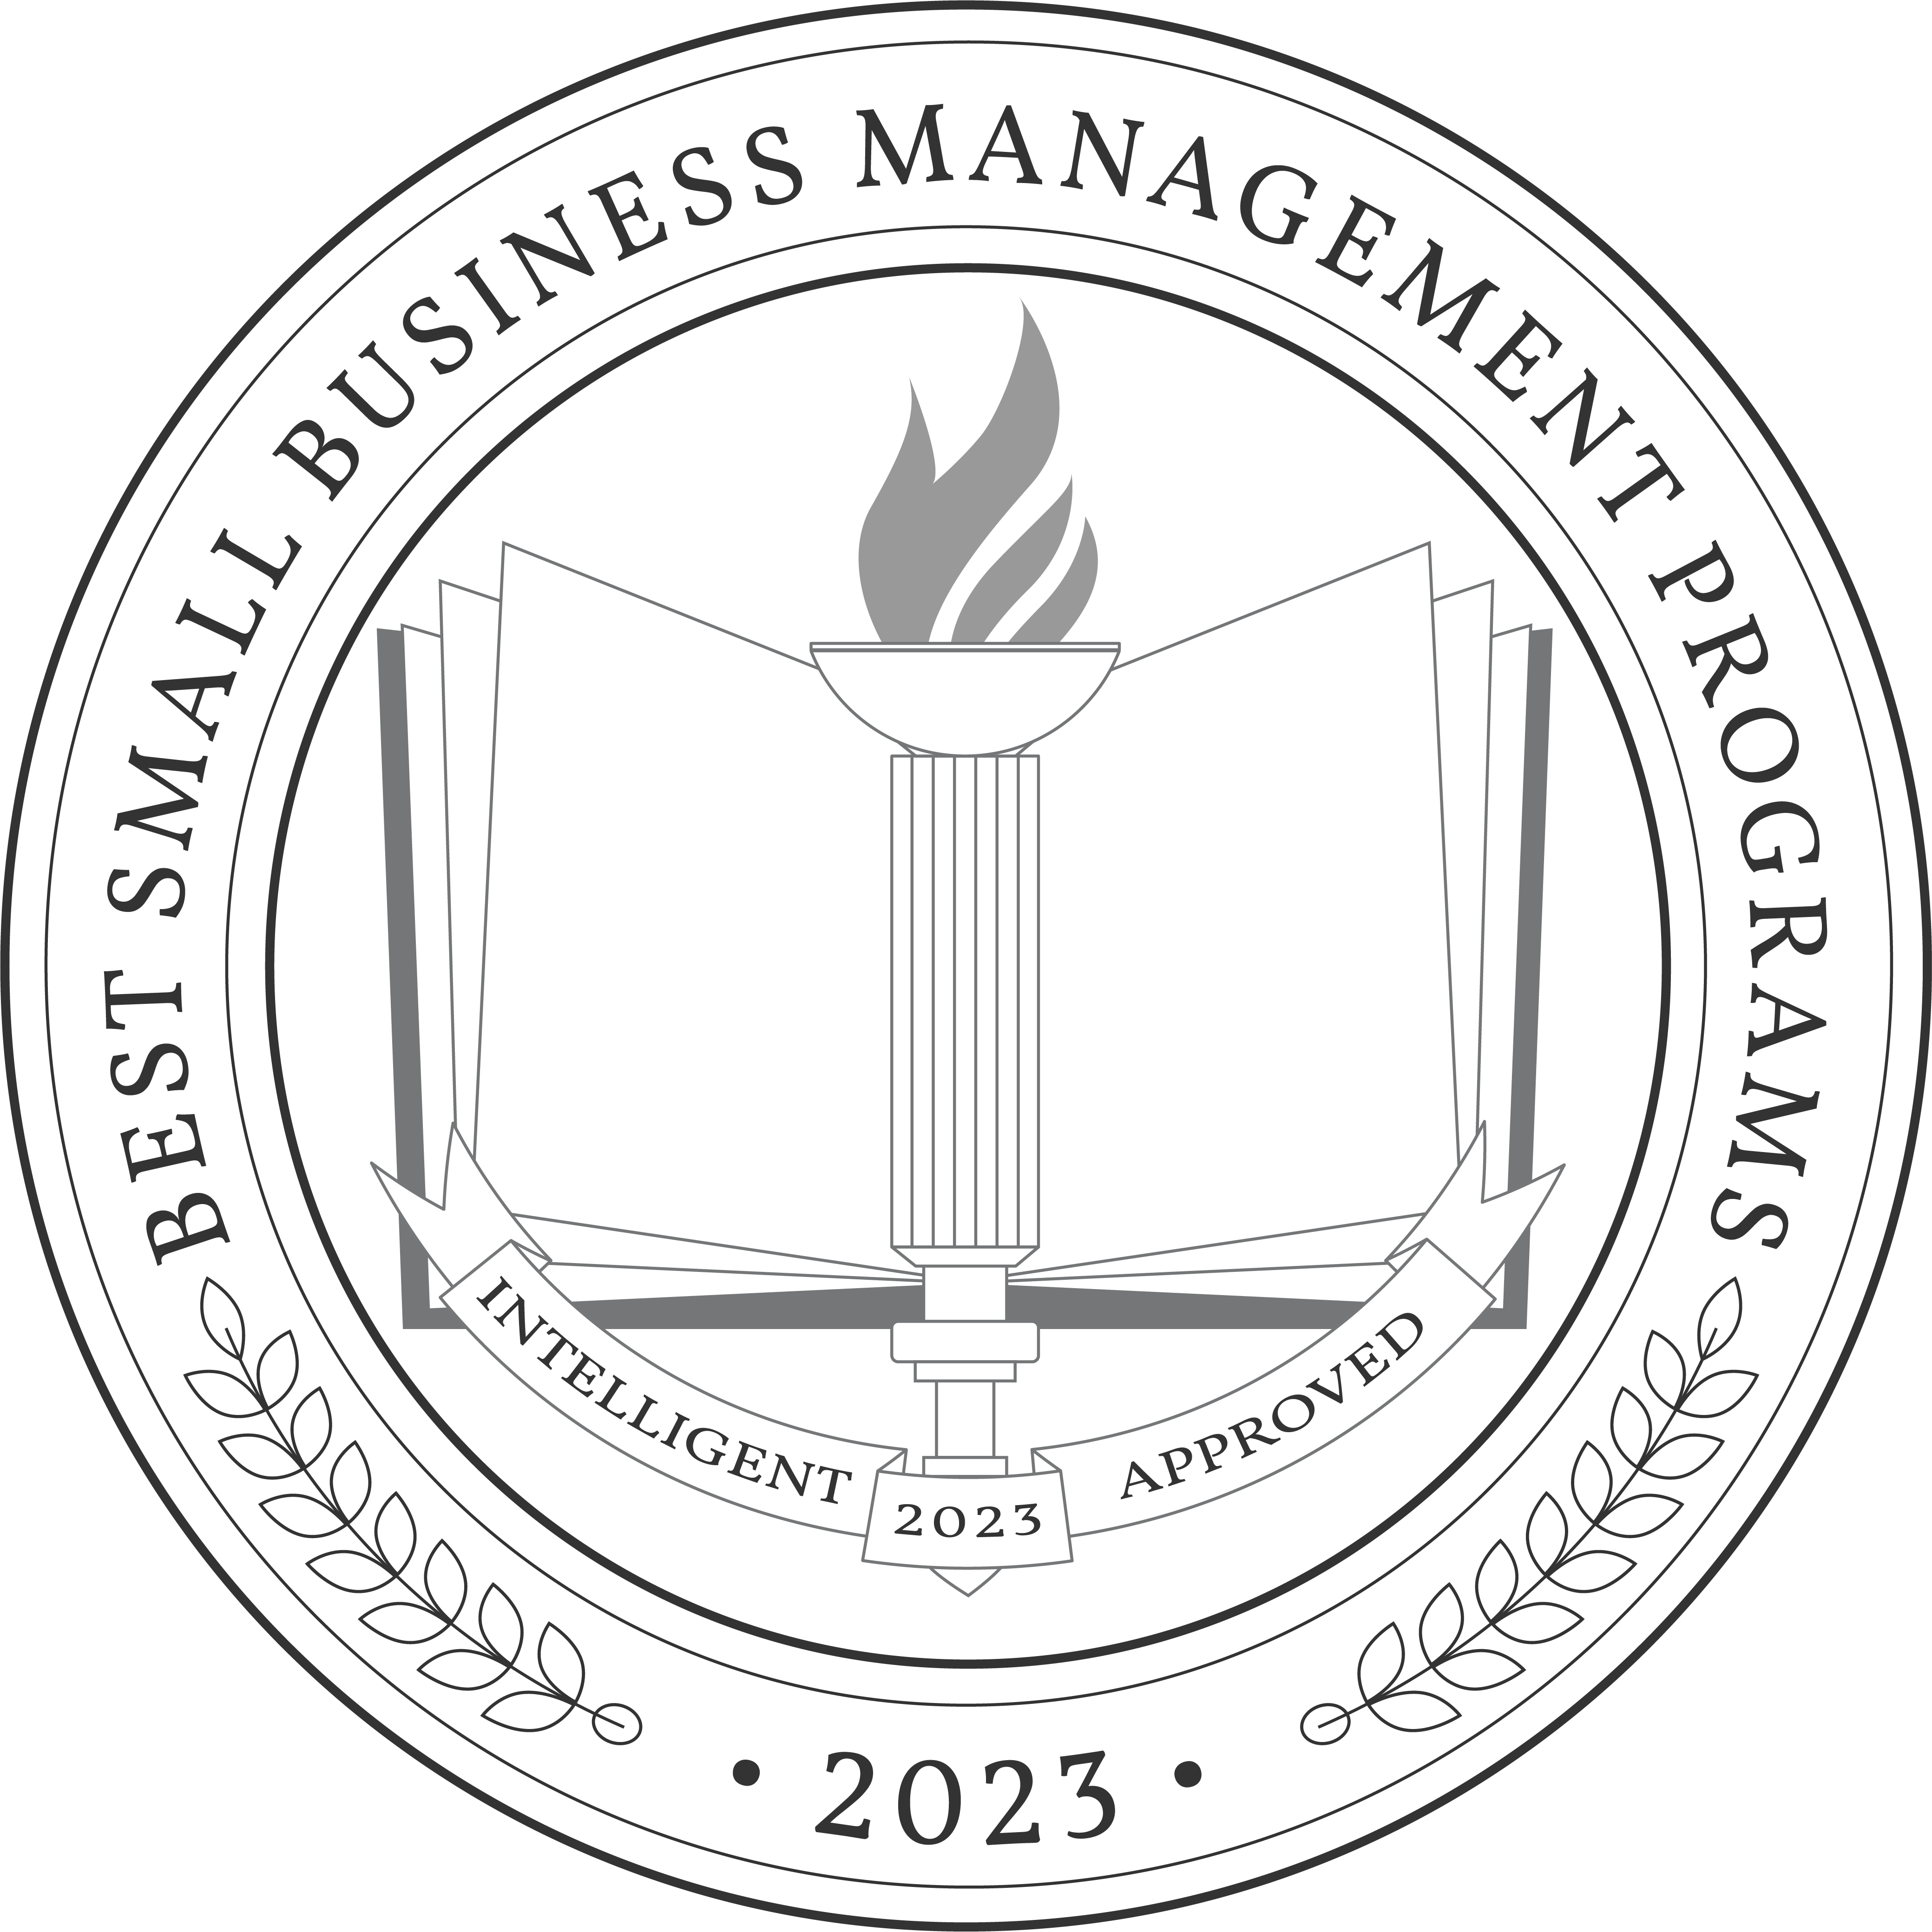 Best Small Business Management Programs badge